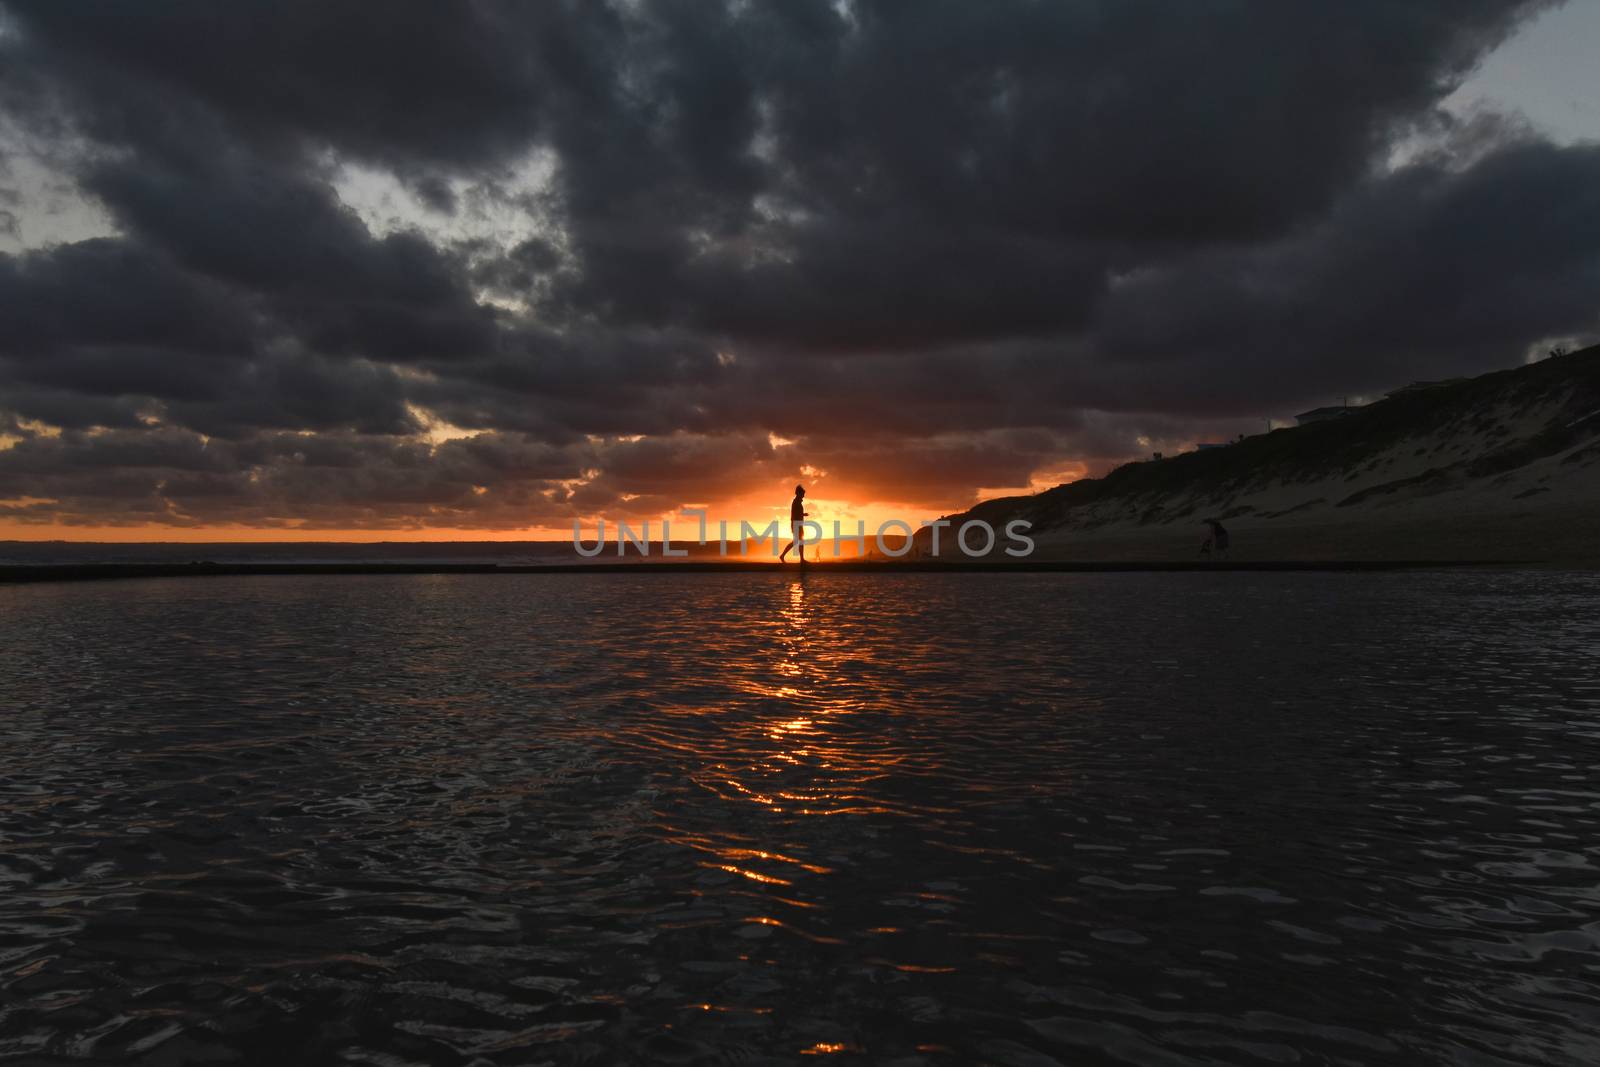 Silhouette of a woman in the sunset over tide pool water surface, Mossel Bay, South Africa